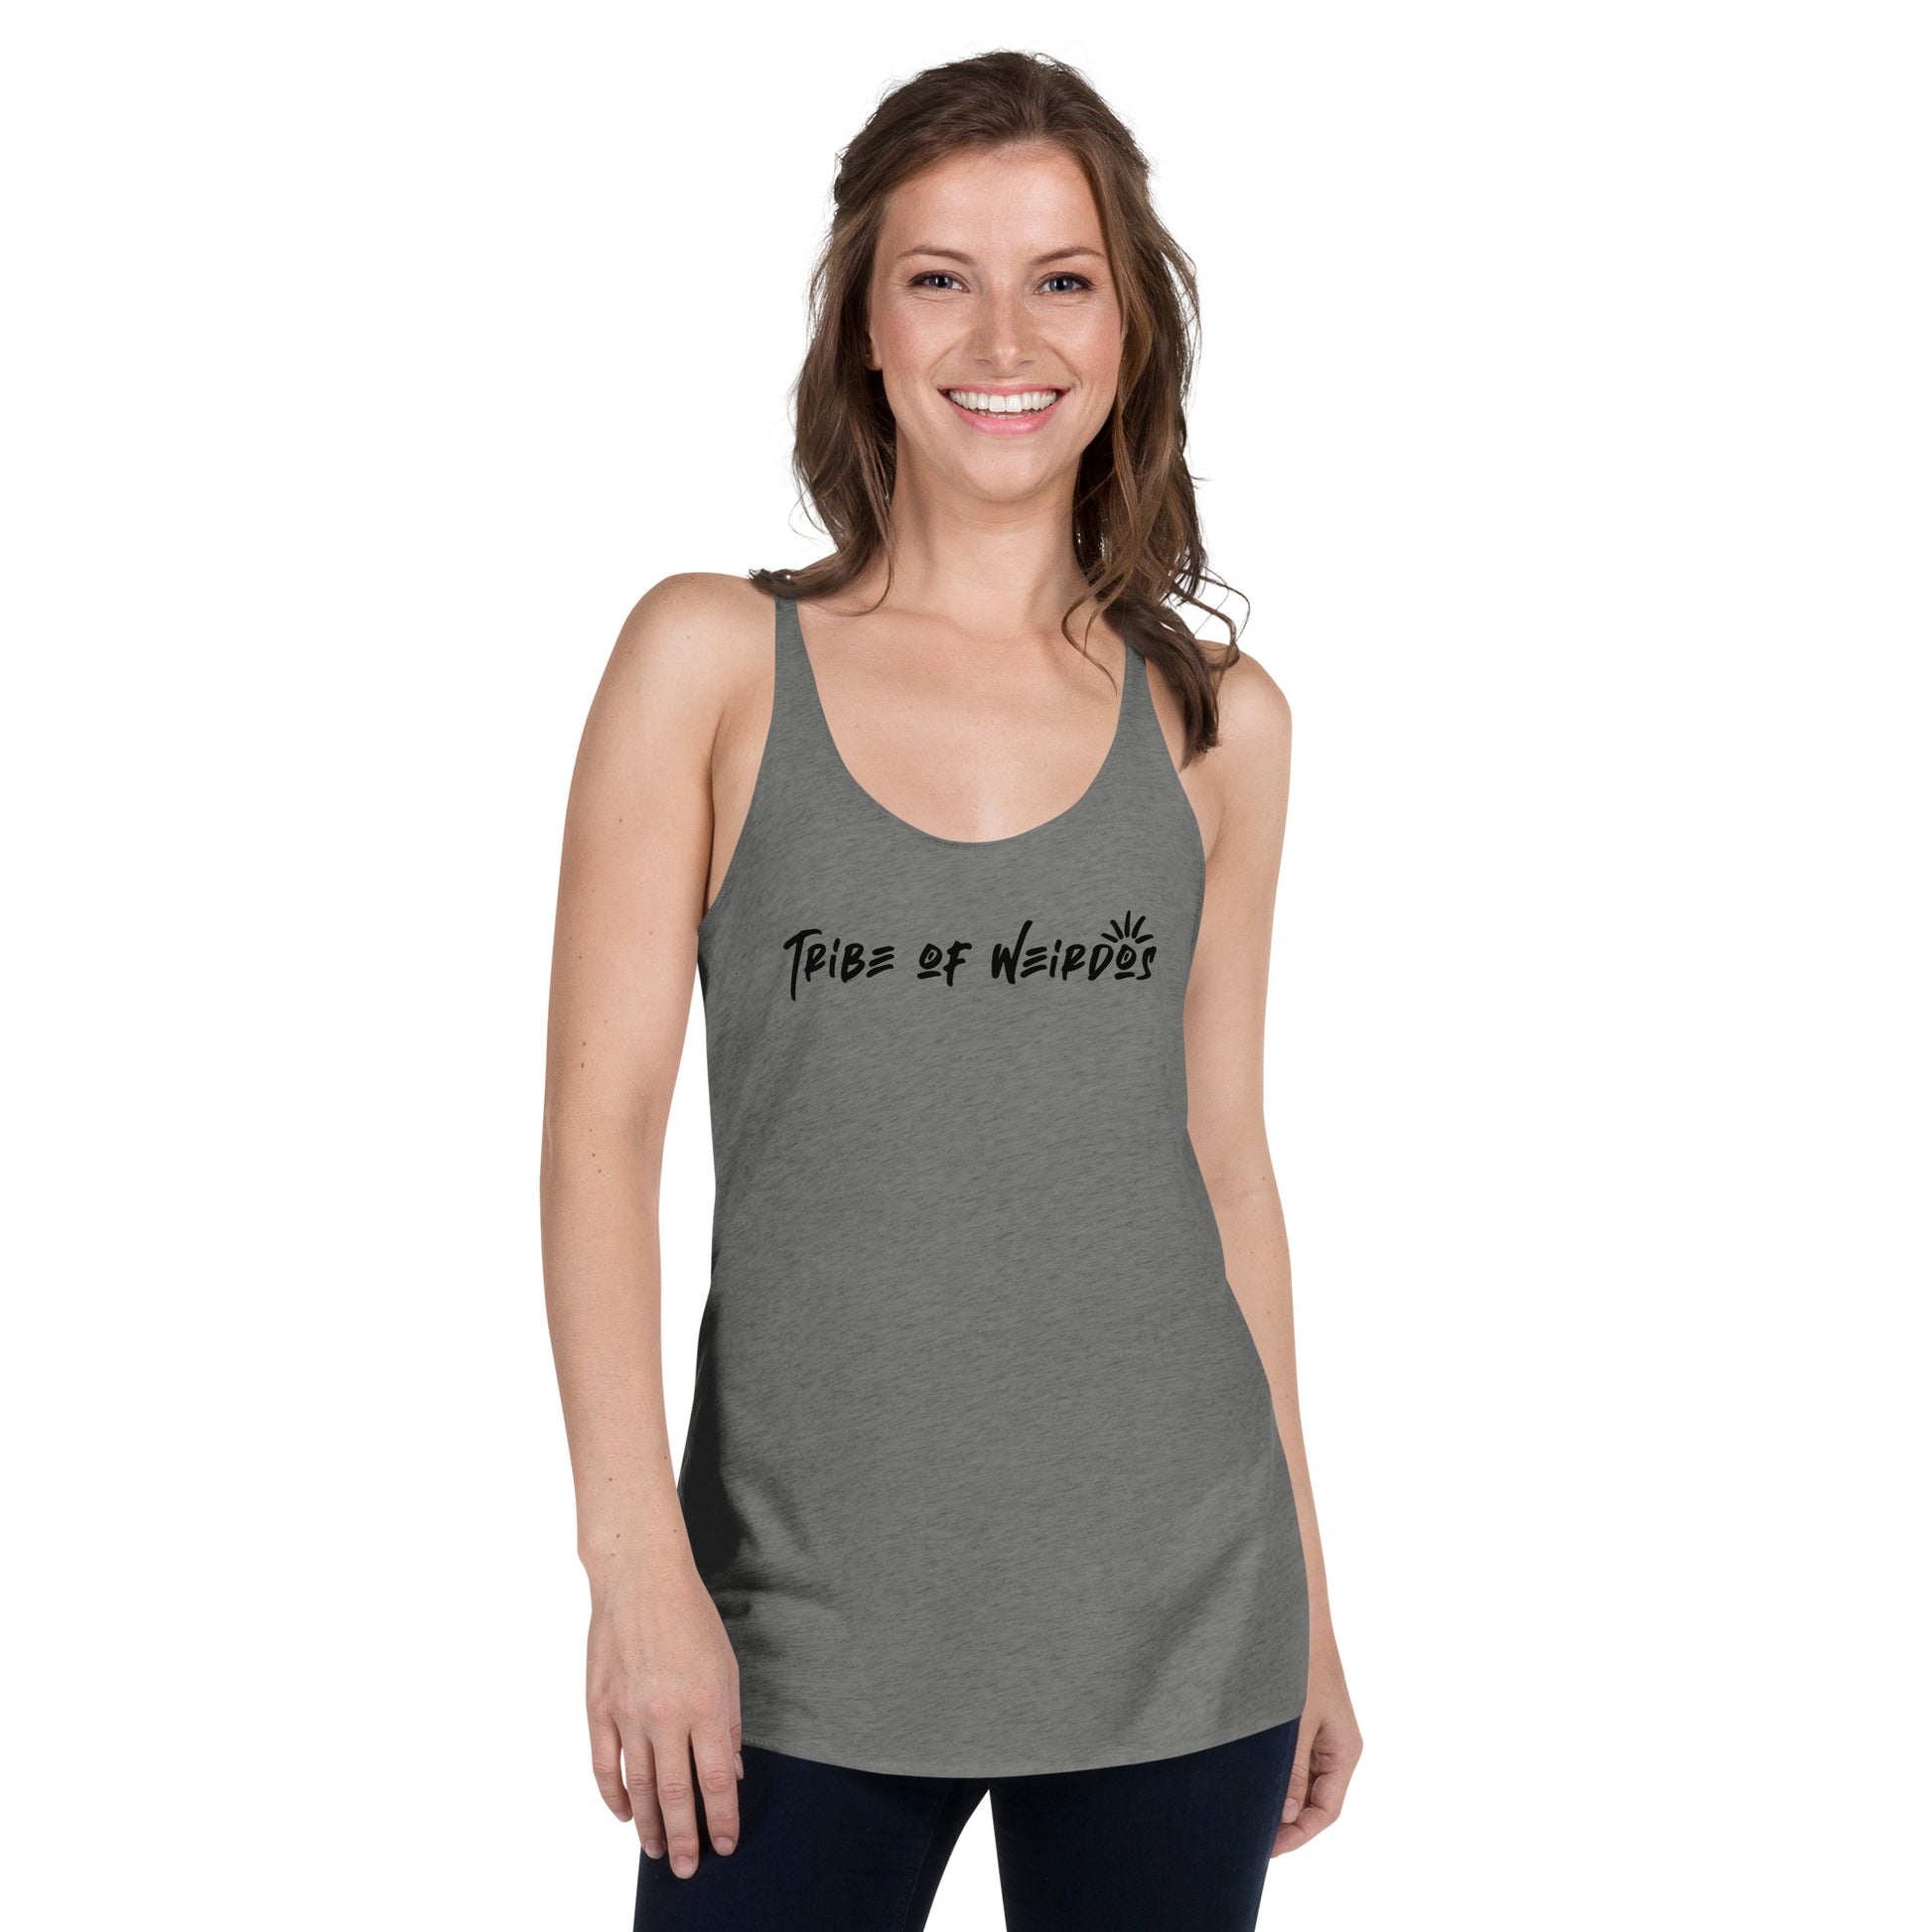 Tribe of Weirdos Women's Racerback Tank - flaunt your individuality with this comfy and chic symbol of the tribe's spirit.